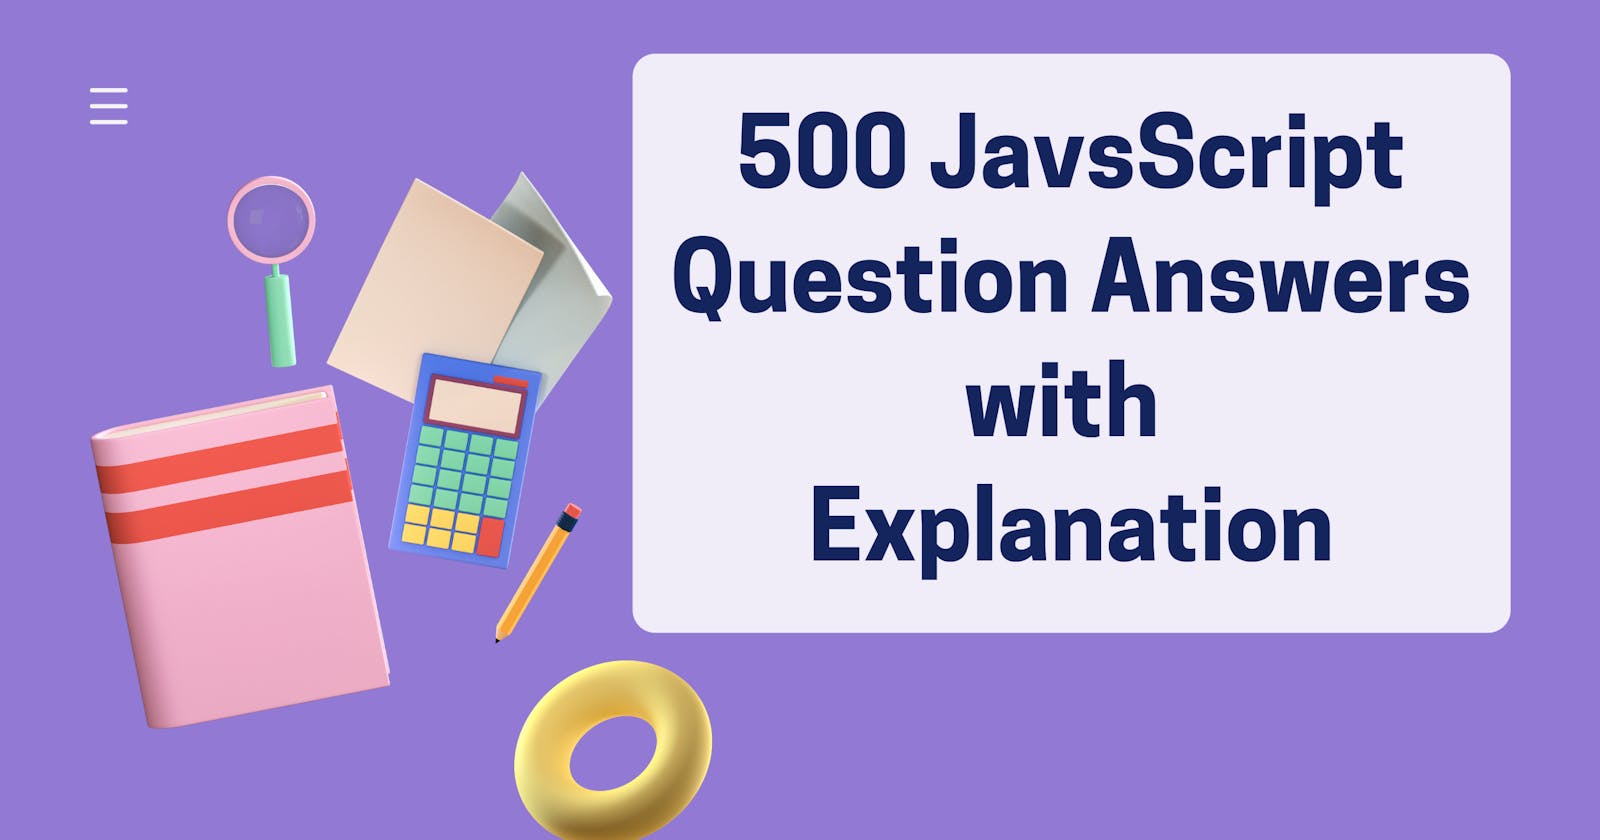 Part-1 : 500 JavaScript Important Questions with Answers and Explanation